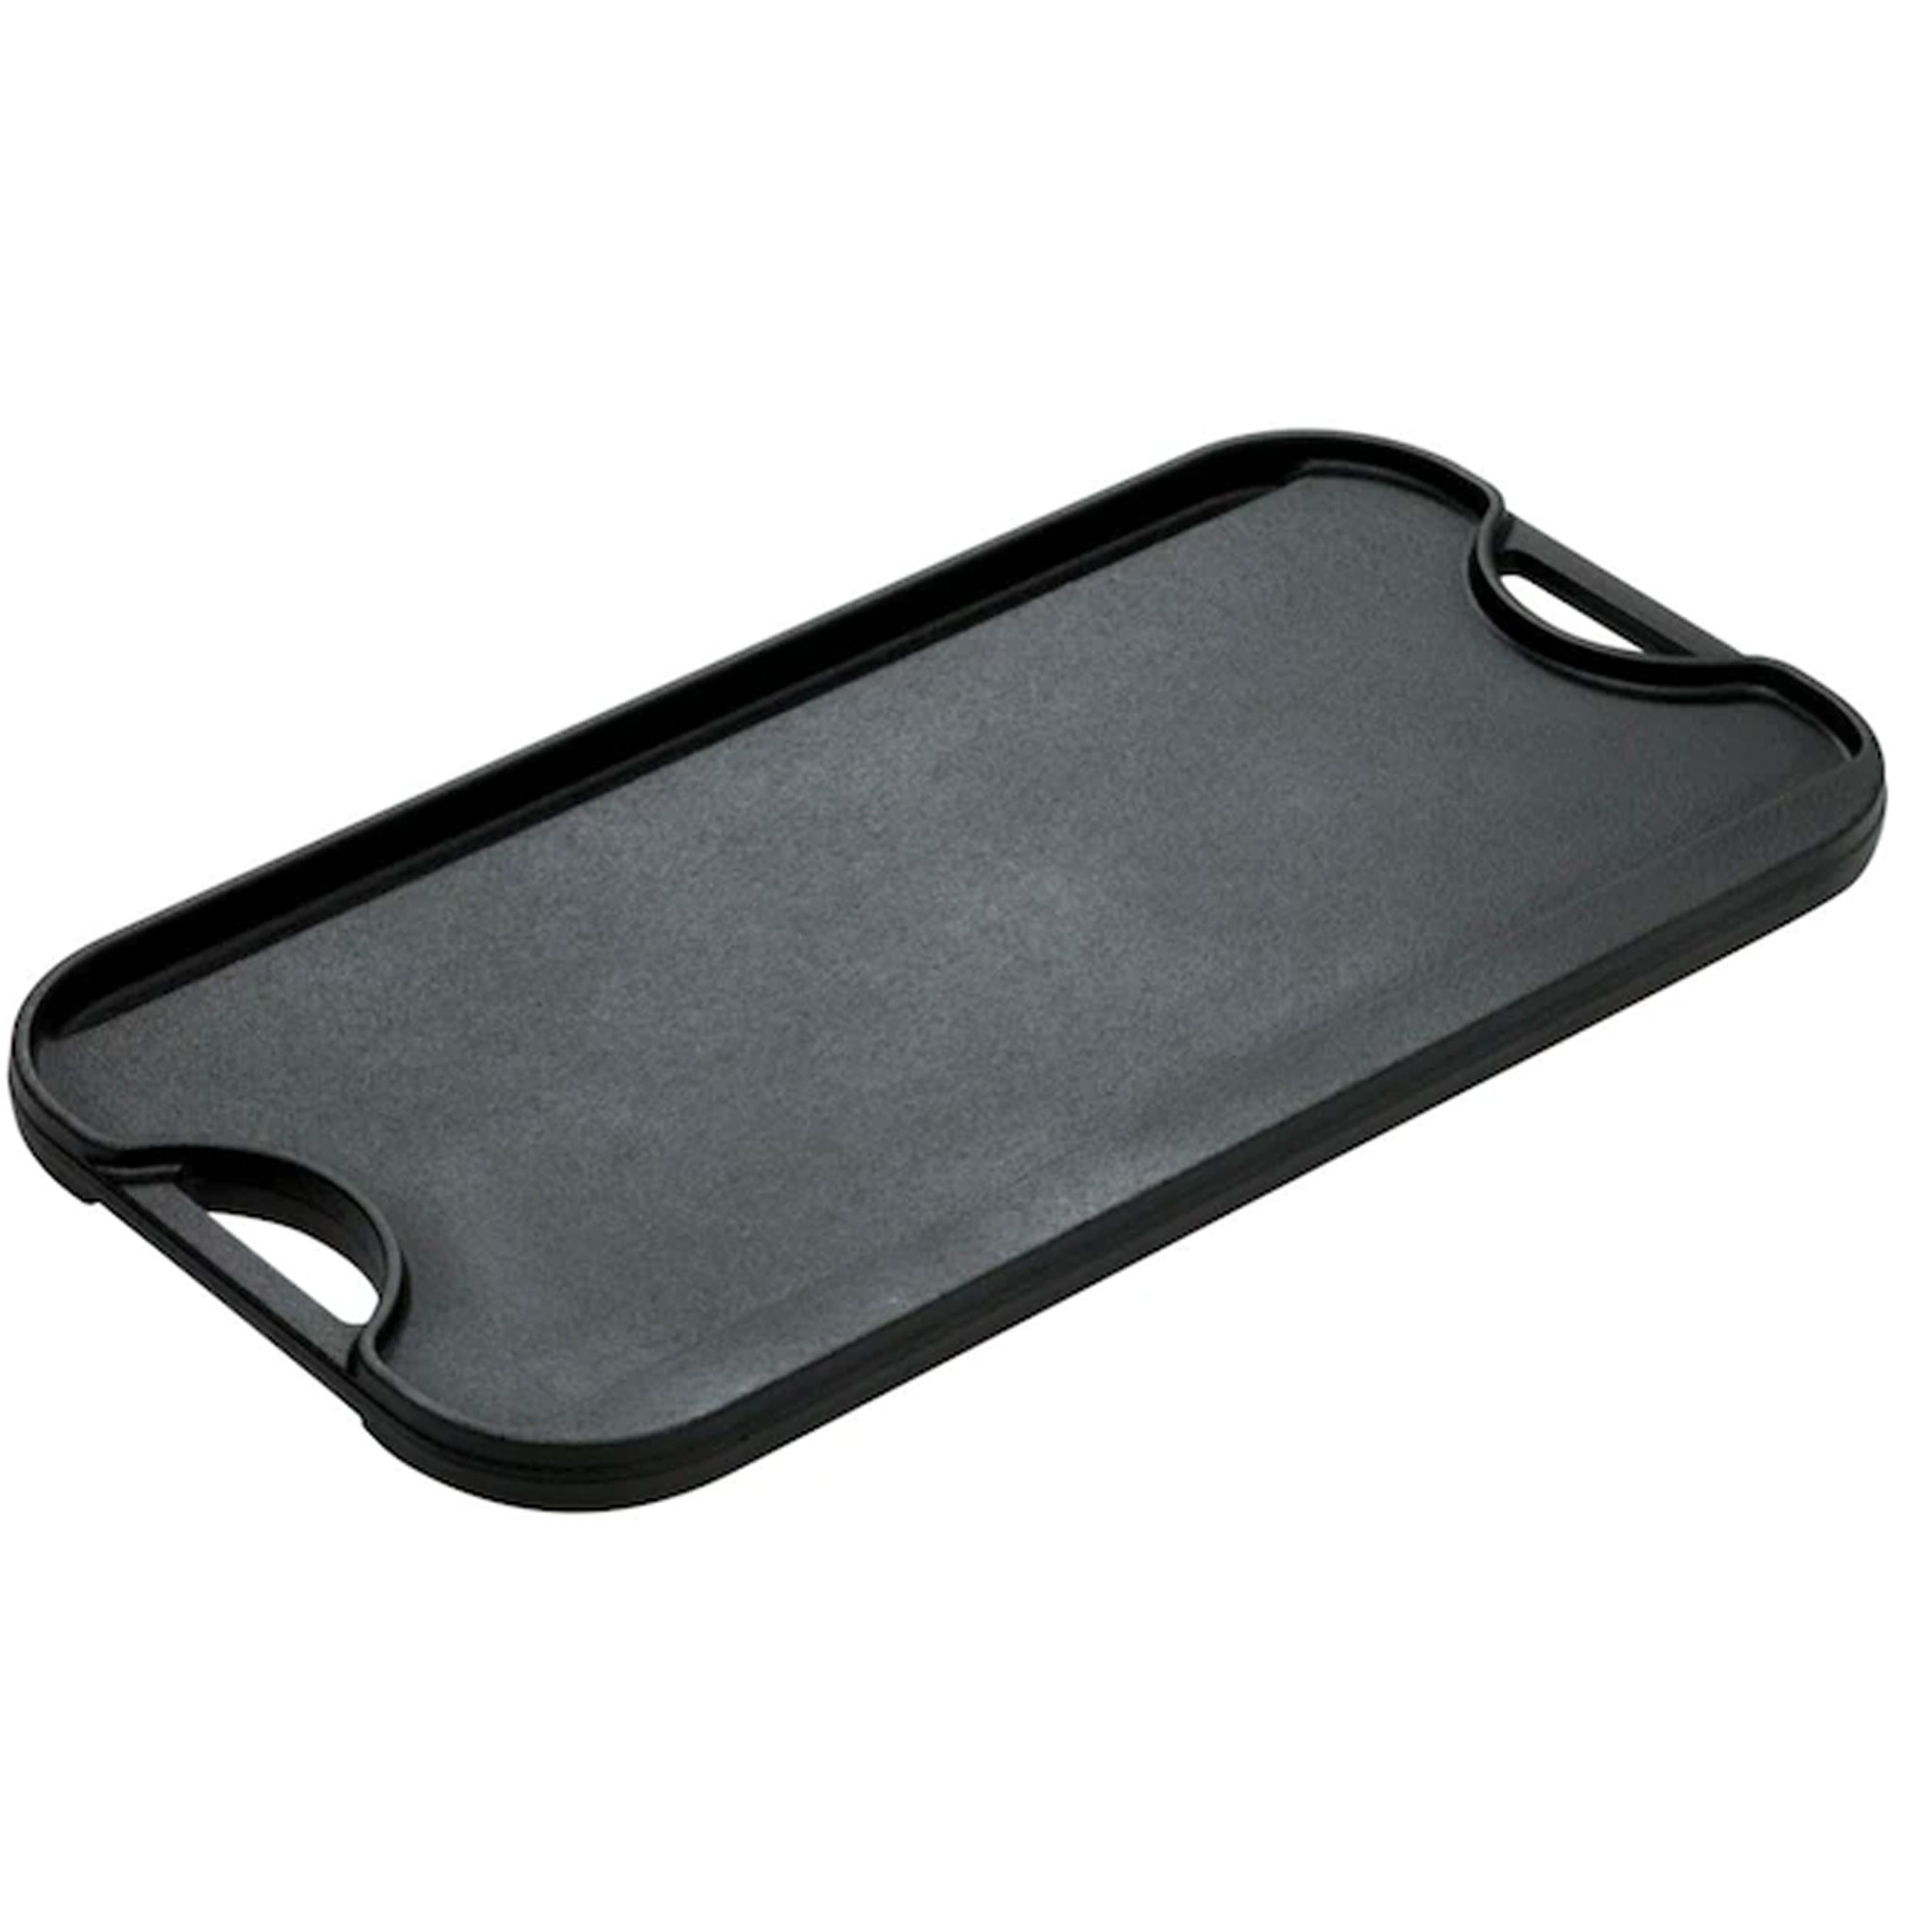 Lodge Lodge - 20 x 10.44 Cast Iron Reversible Grill/Griddle - HPG -  Promotional Products Supplier